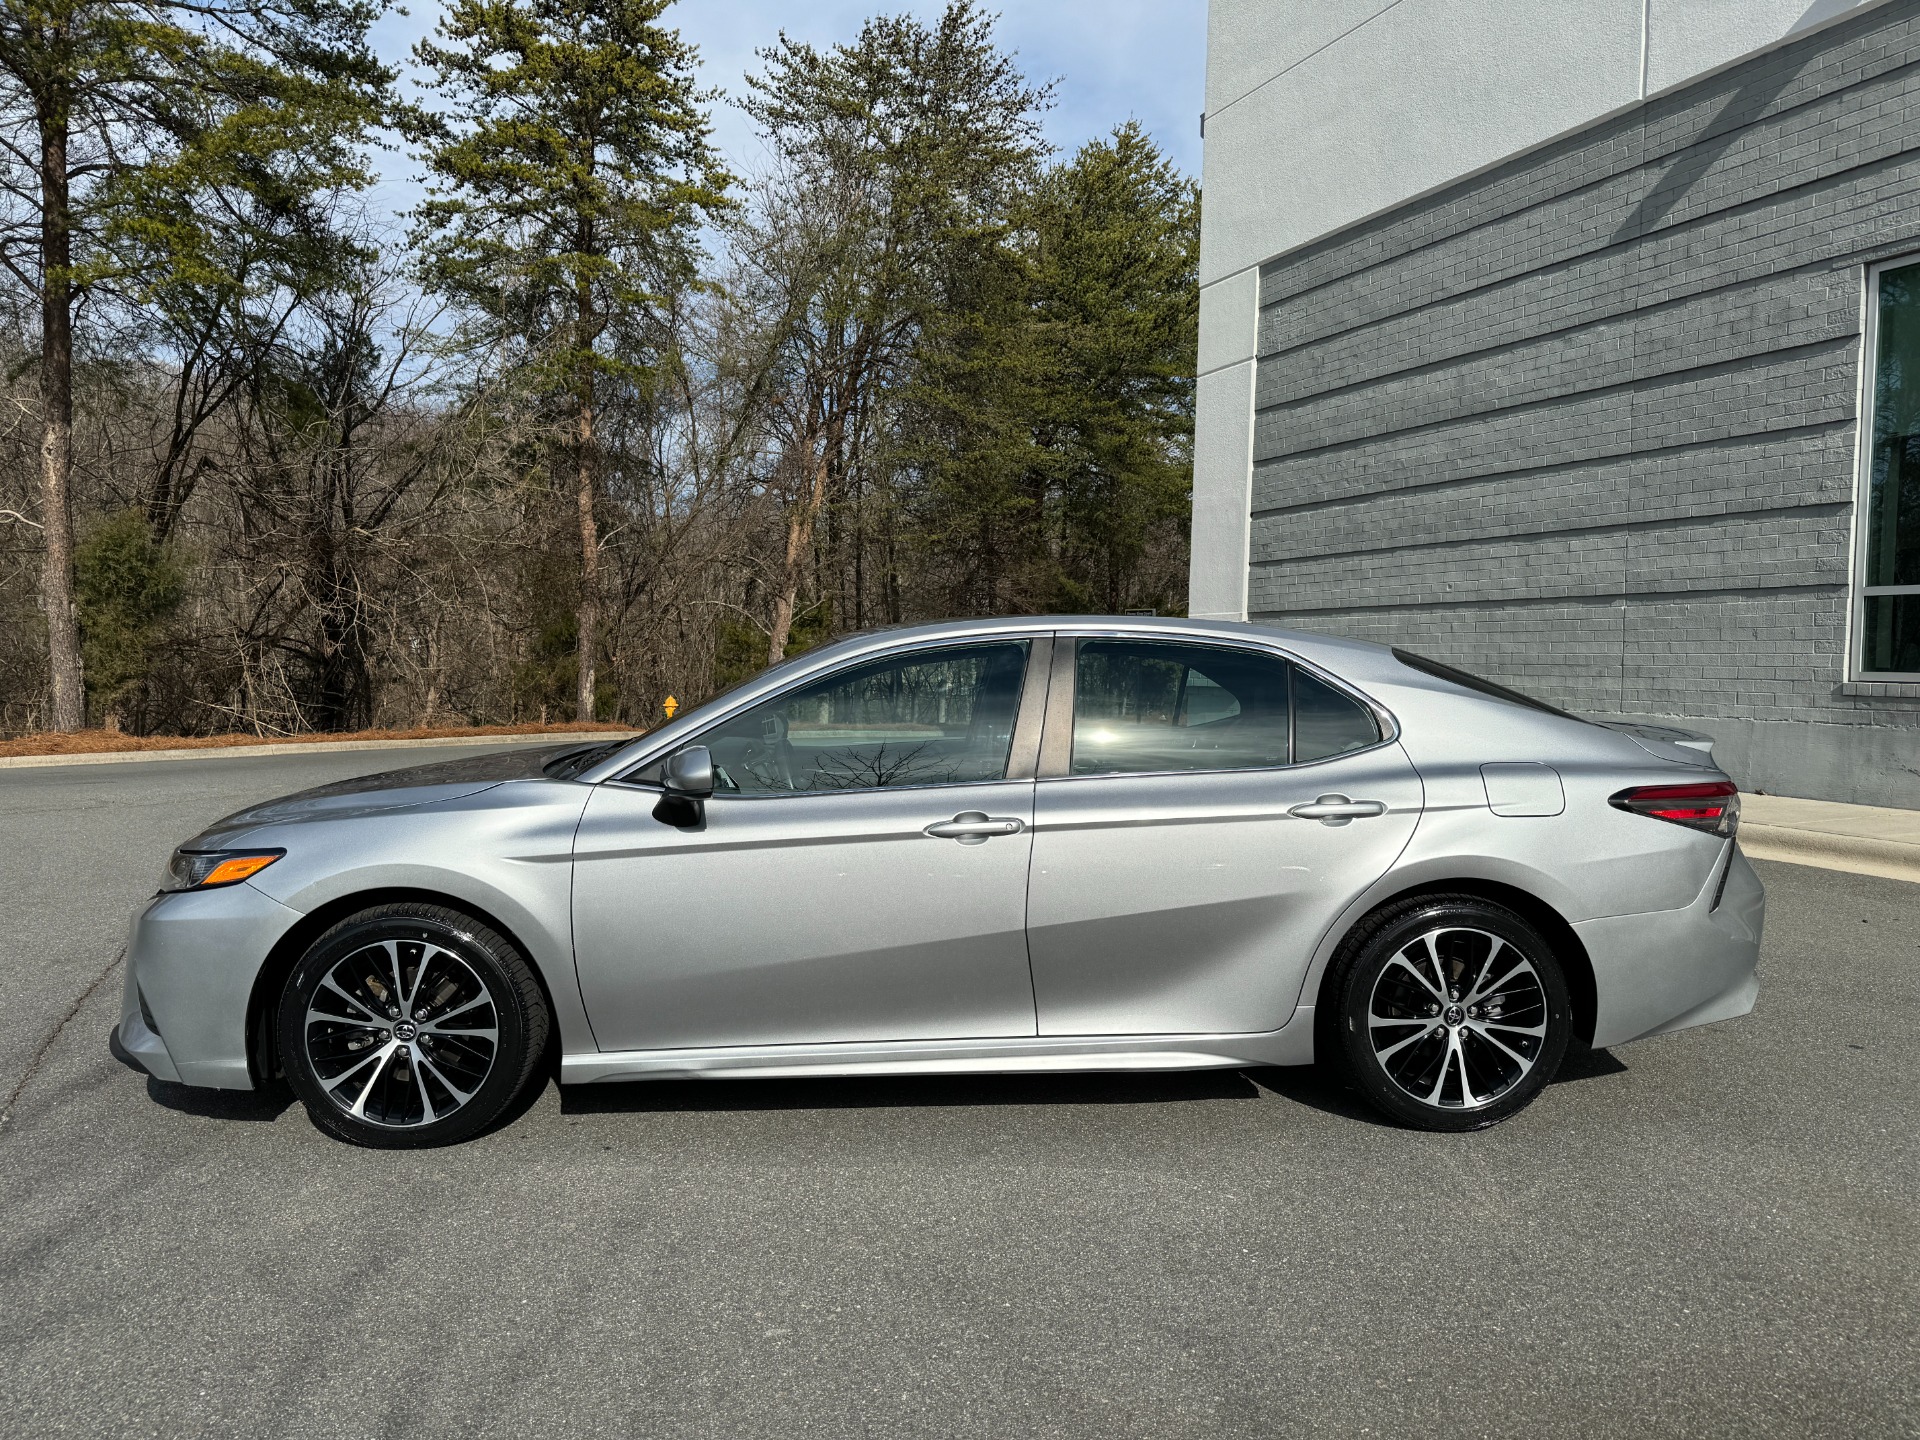 Used 2018 Toyota Camry SE ENTUNE AUDIO / SPORT SUSPENSION / 18IN WHEELS for sale $18,995 at Formula Imports in Charlotte NC 28227 3